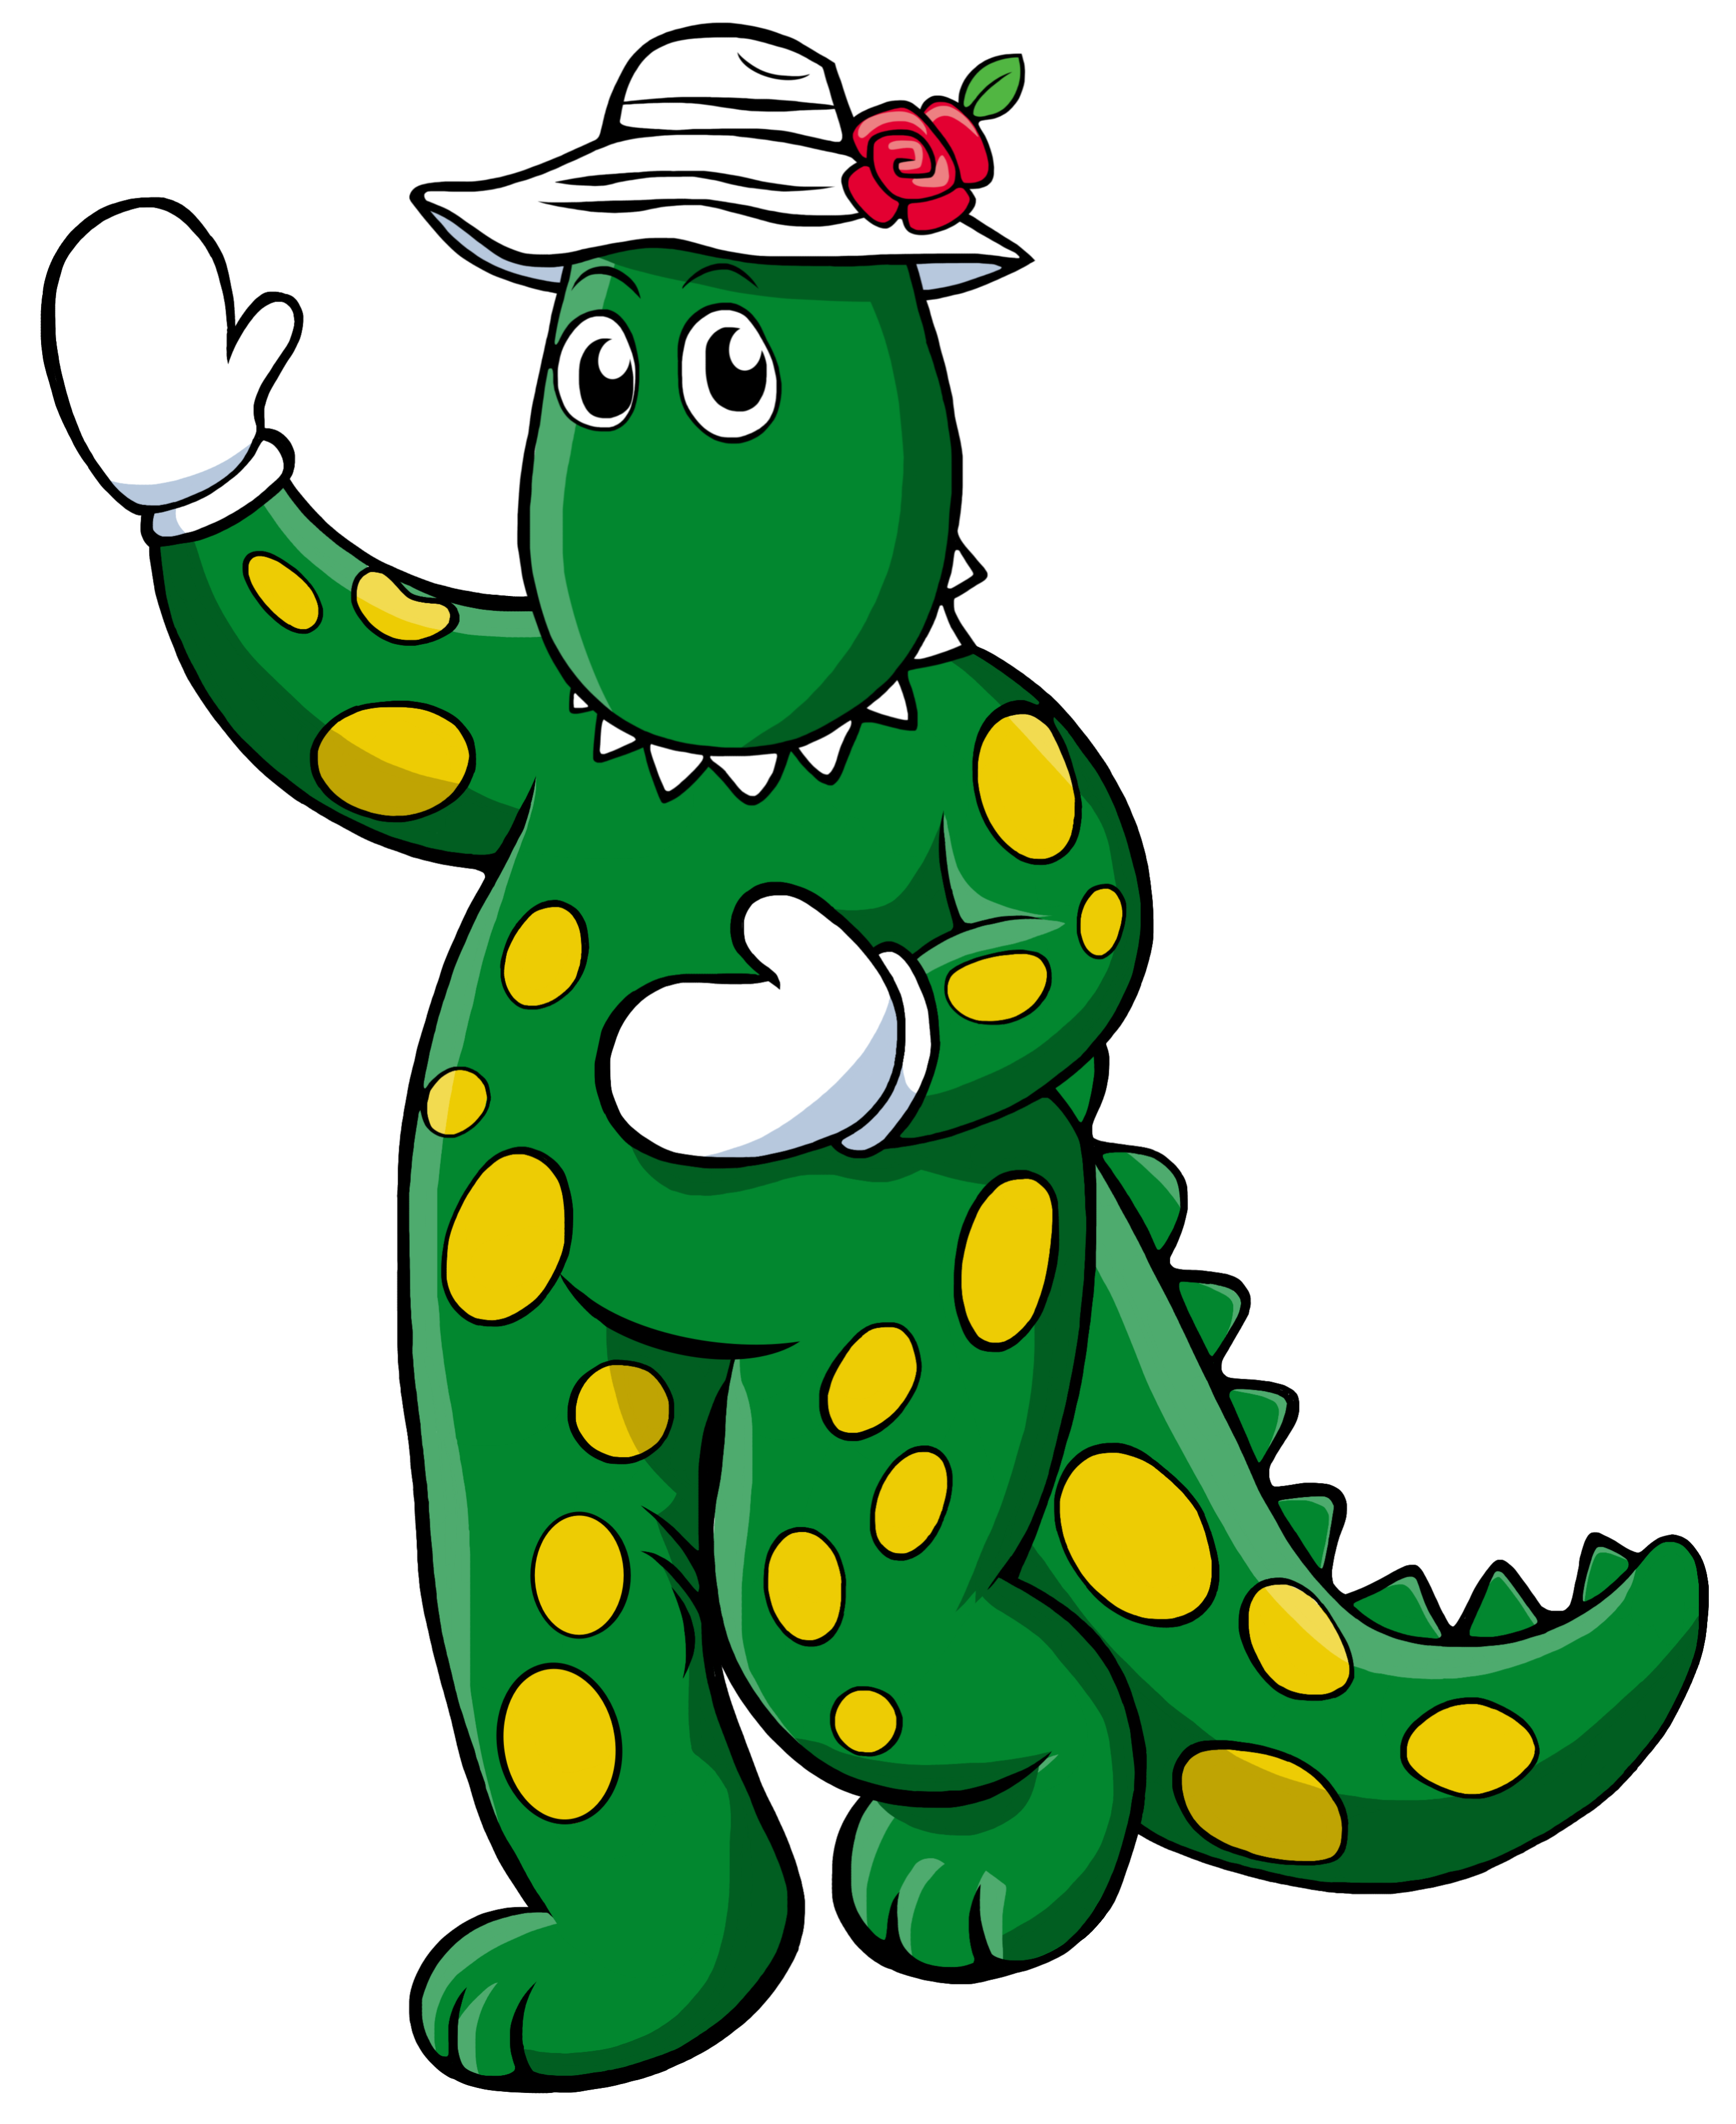 Dorothy the Dinosaur Render PNG 2 by seanscreations1 on DeviantArt